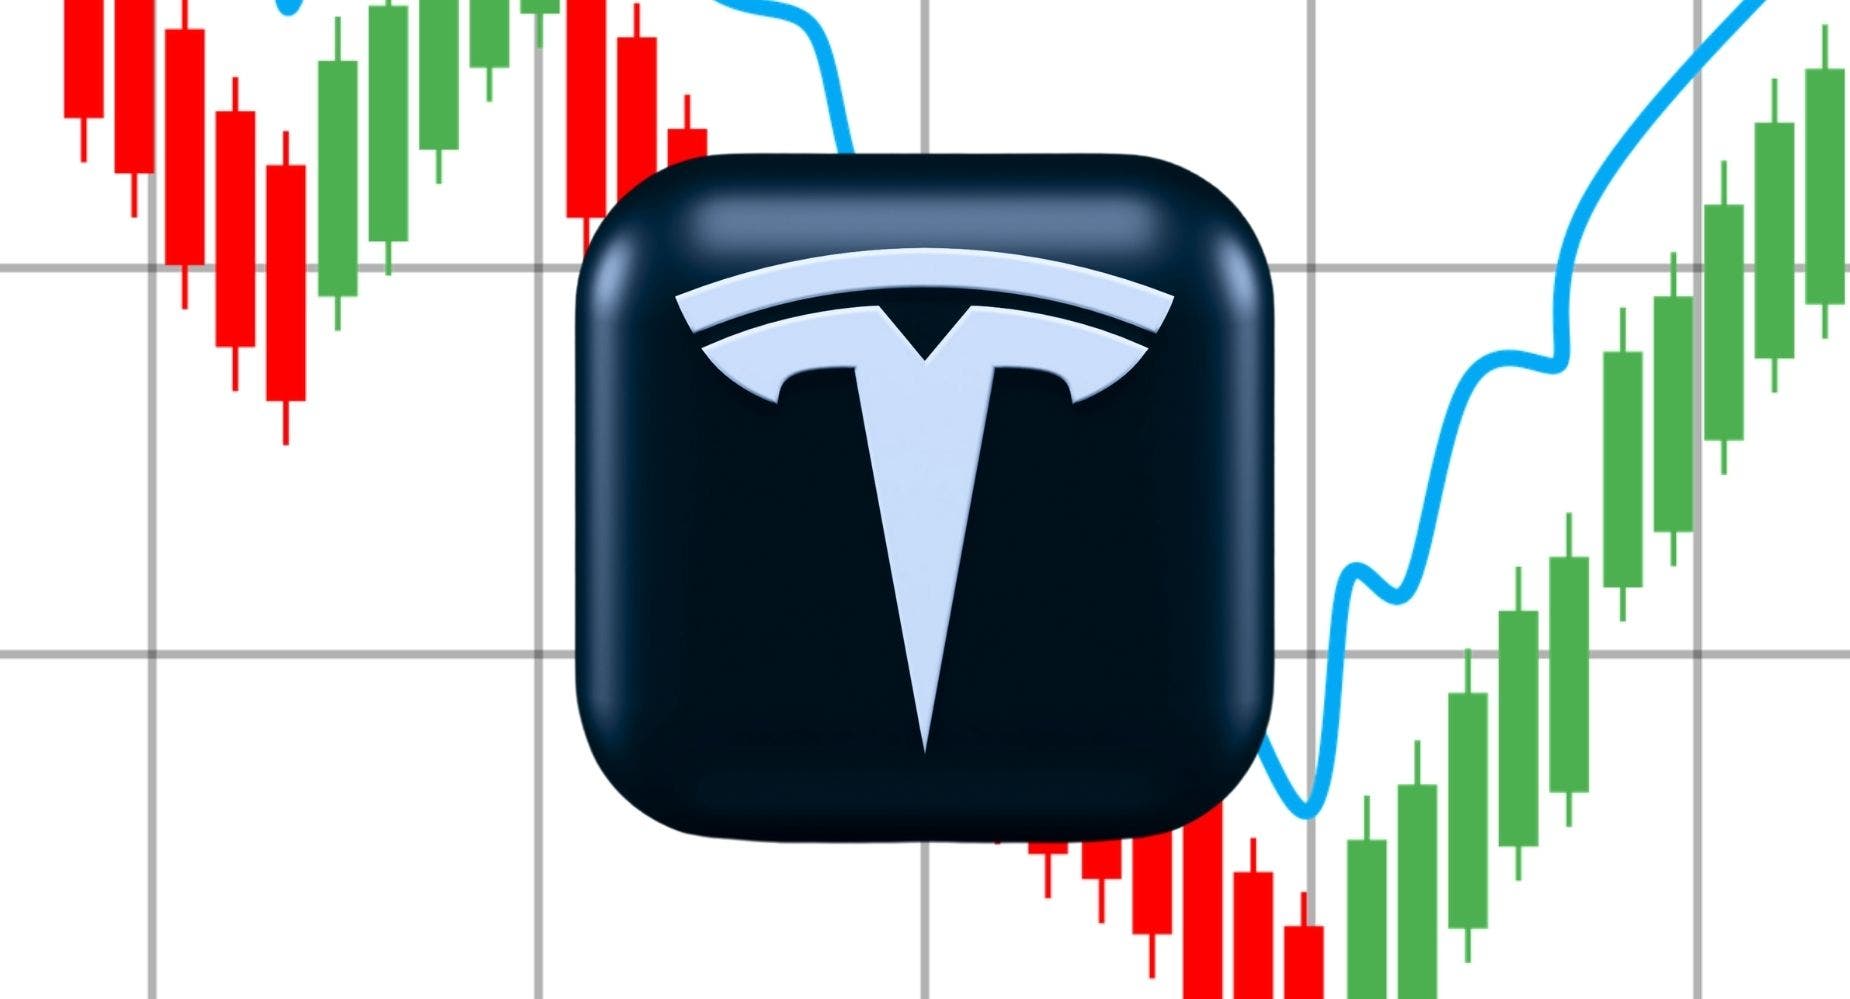 Tesla Chart Shows A Pivotal Moment For Stock Following Bearish Earnings, Price Target Cut